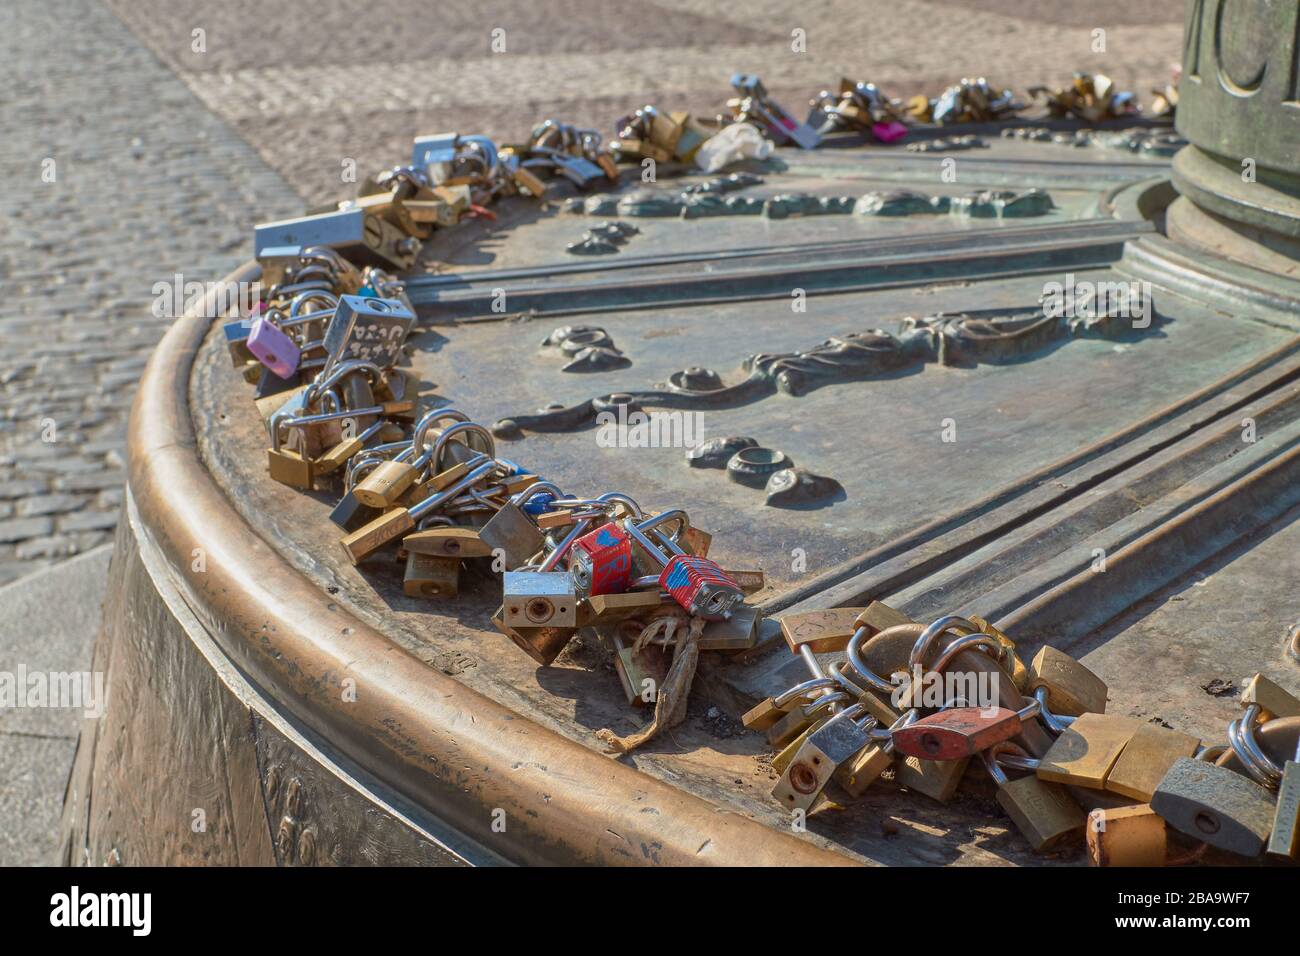 Plaza Mayor, Madrid, Spain; September 16 2018: Large number of locks of different shapes and colors closed between them Stock Photo